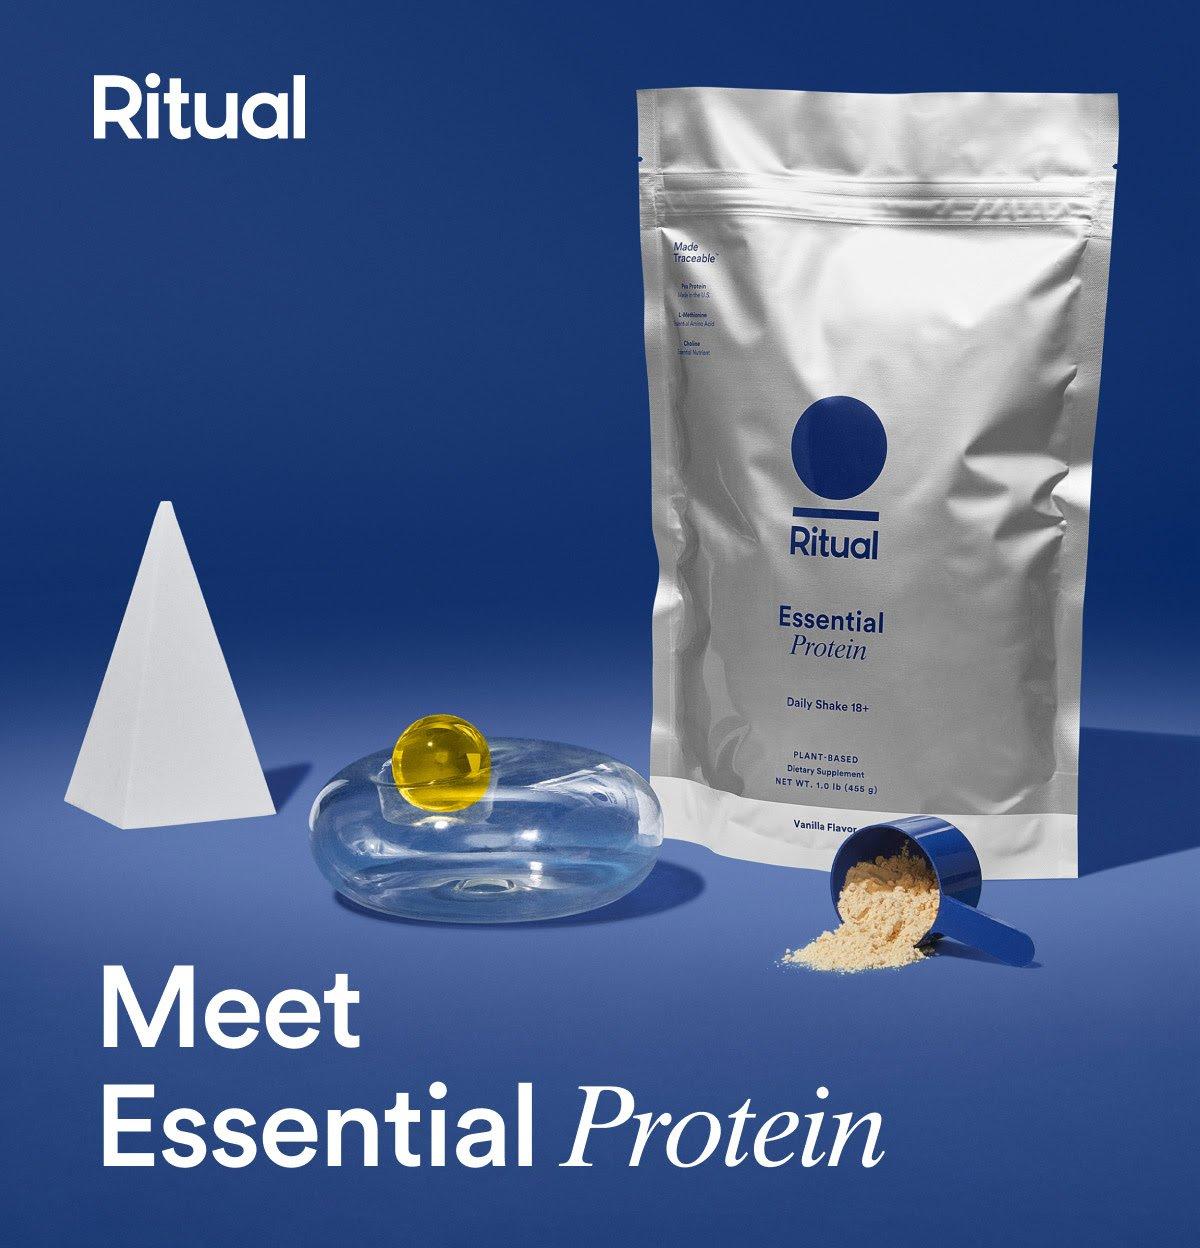 Ritual Essential Protein – Get a Free Shaker with Purchase